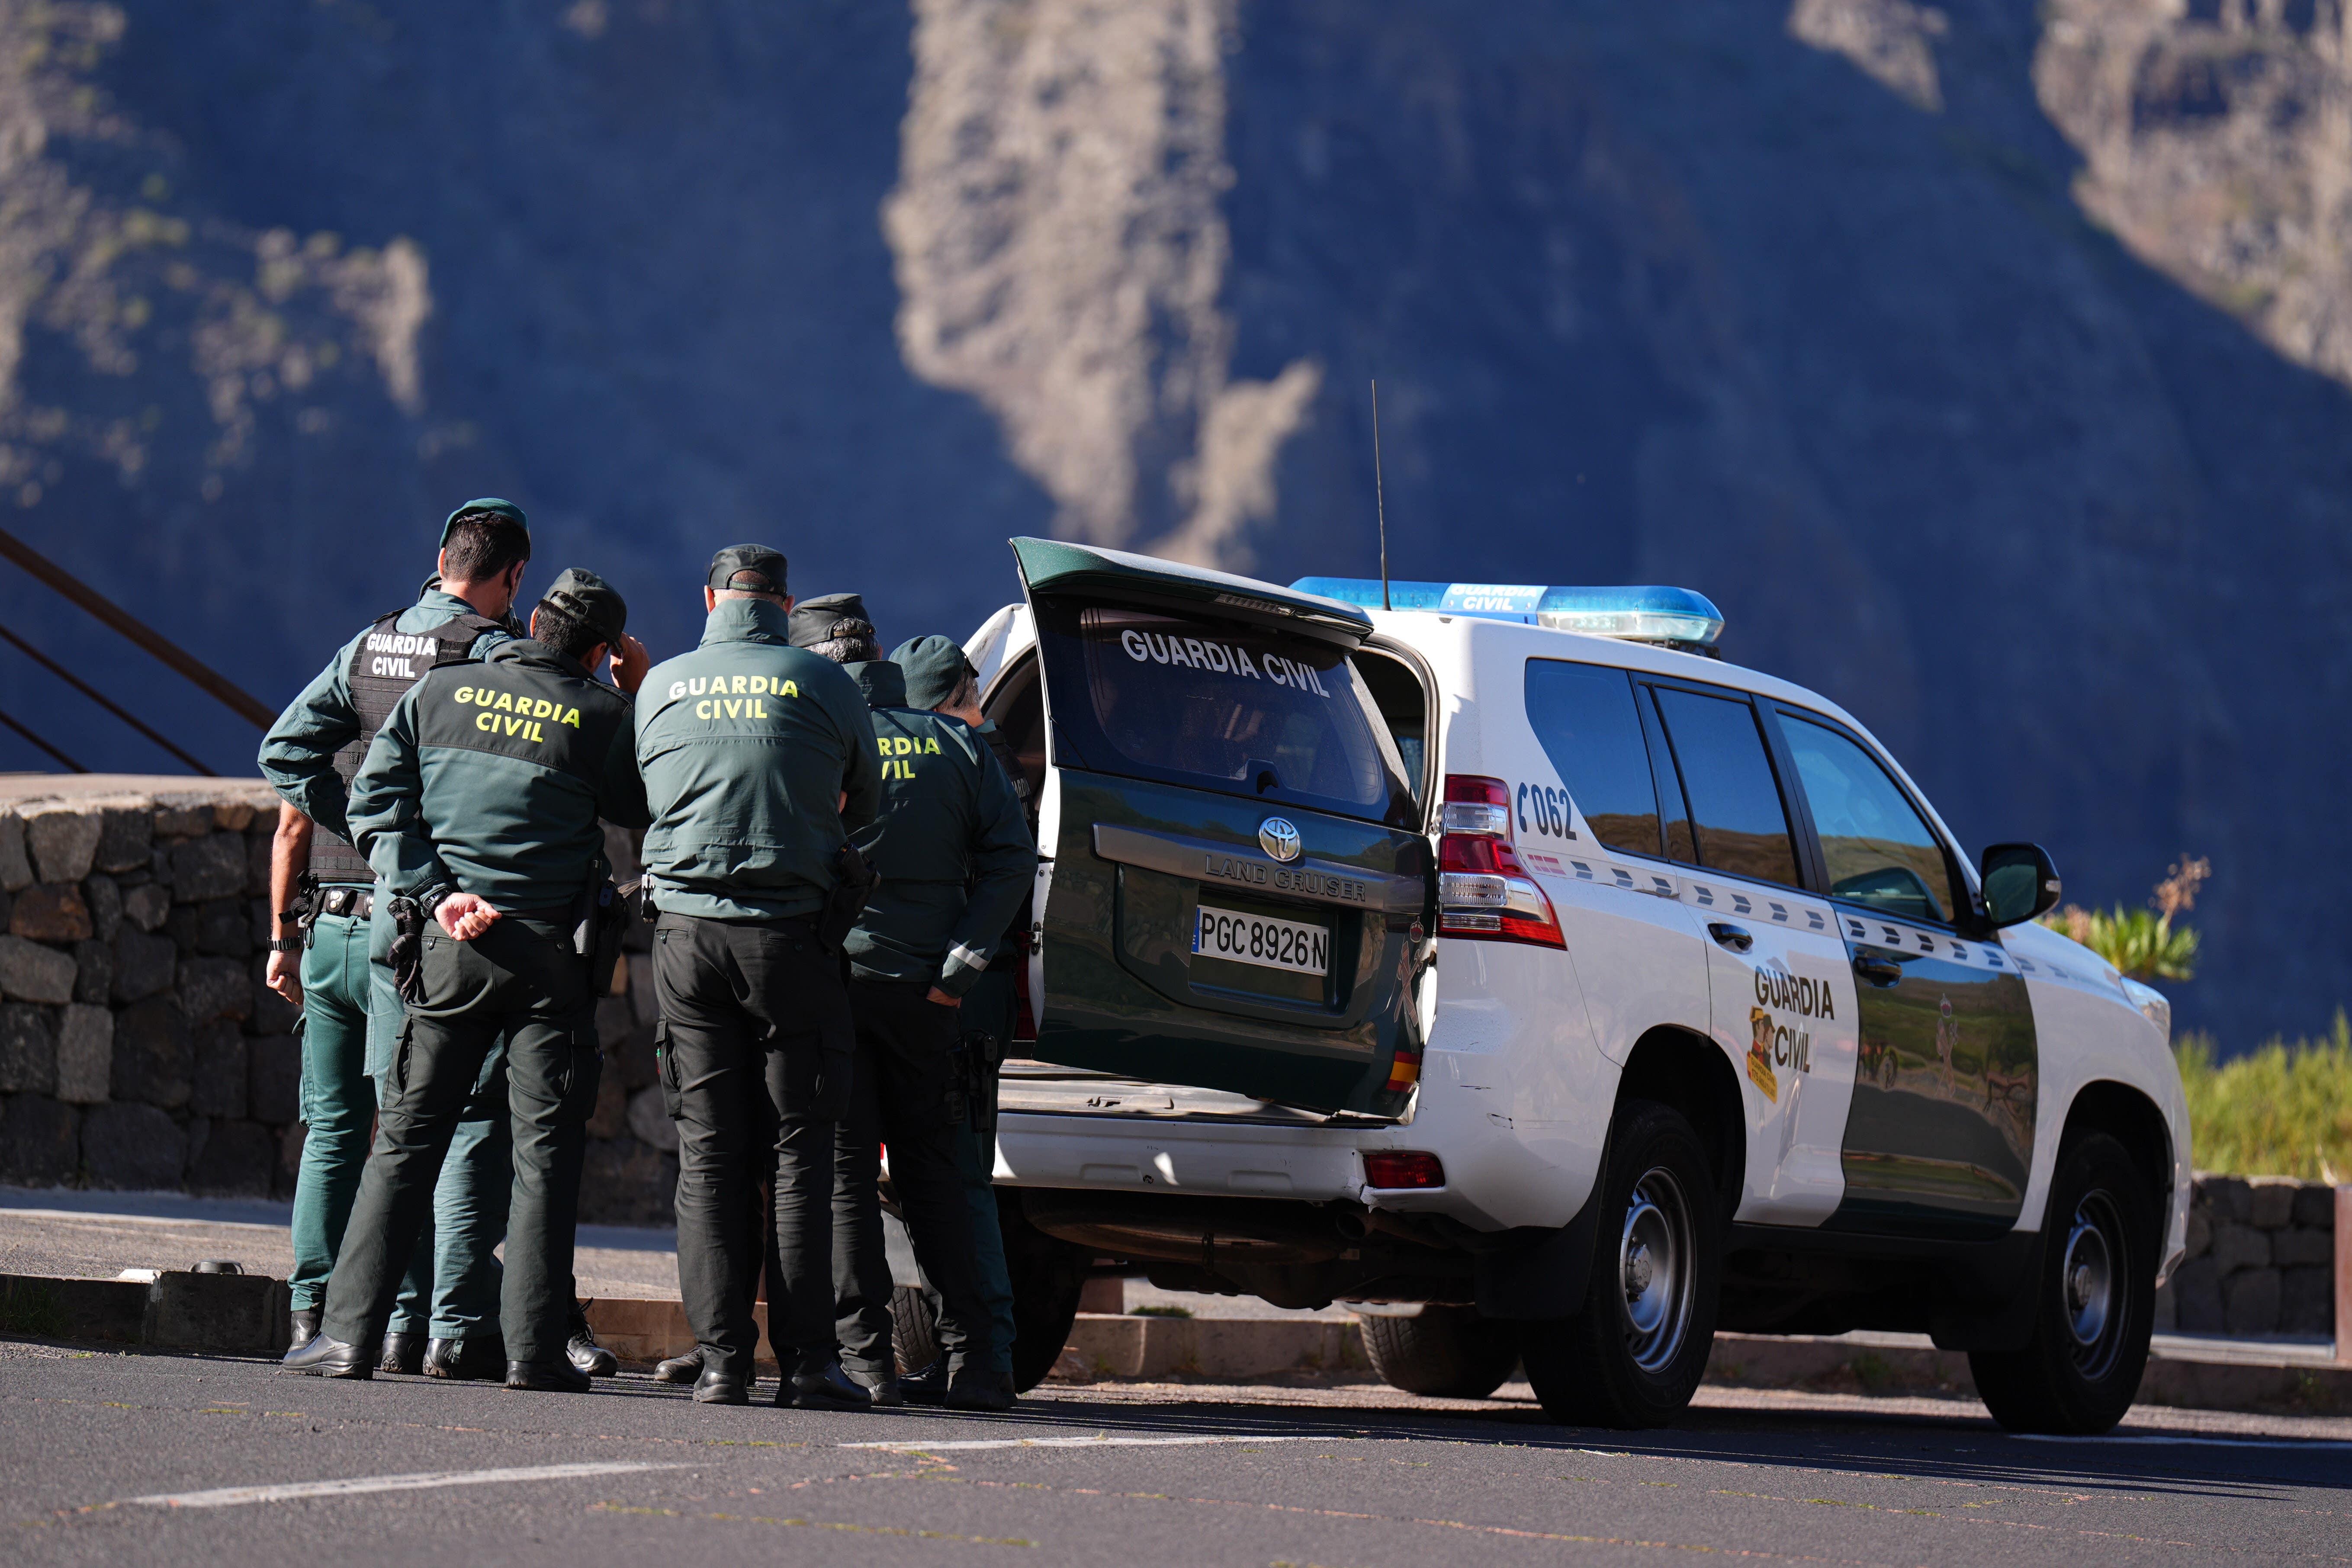 Guardia Civil officers near the village of Masca, Tenerife (James Manning/PA)